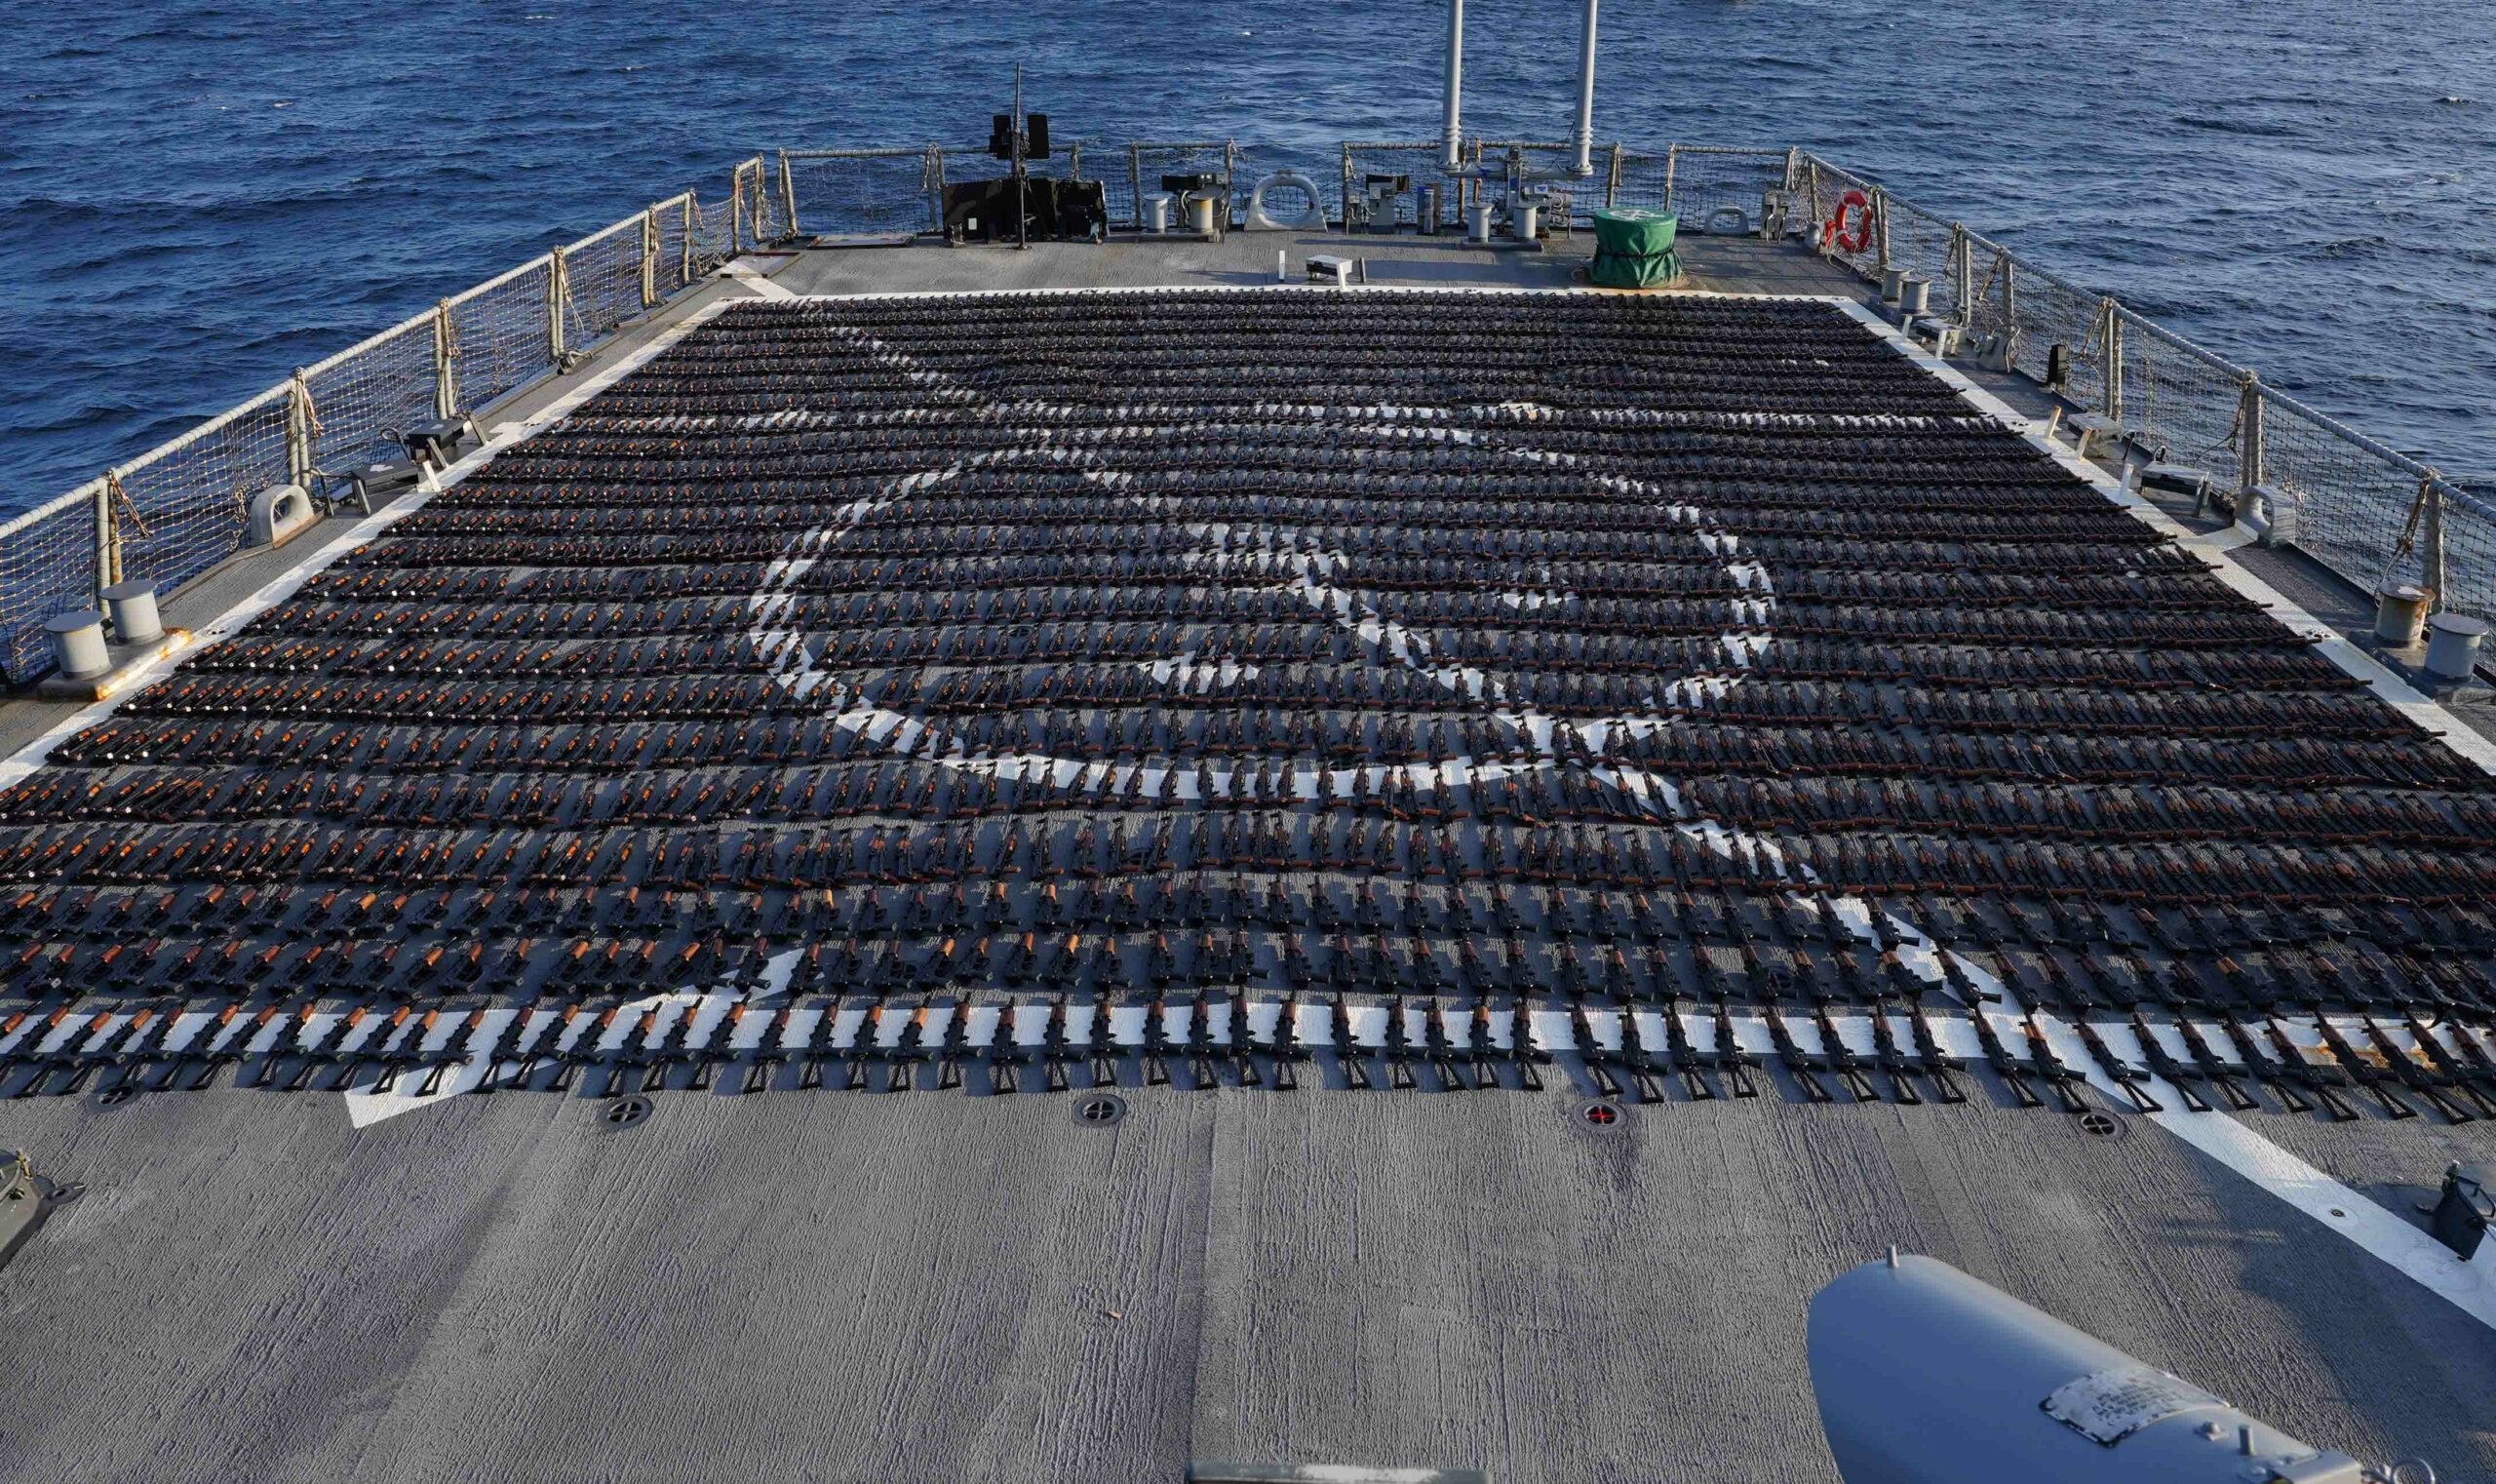 Thousands of AK-47 assault rifles sit on the flight deck of guided-missile destroyer USS The Sullivans during an inventory process, January 7, 2023